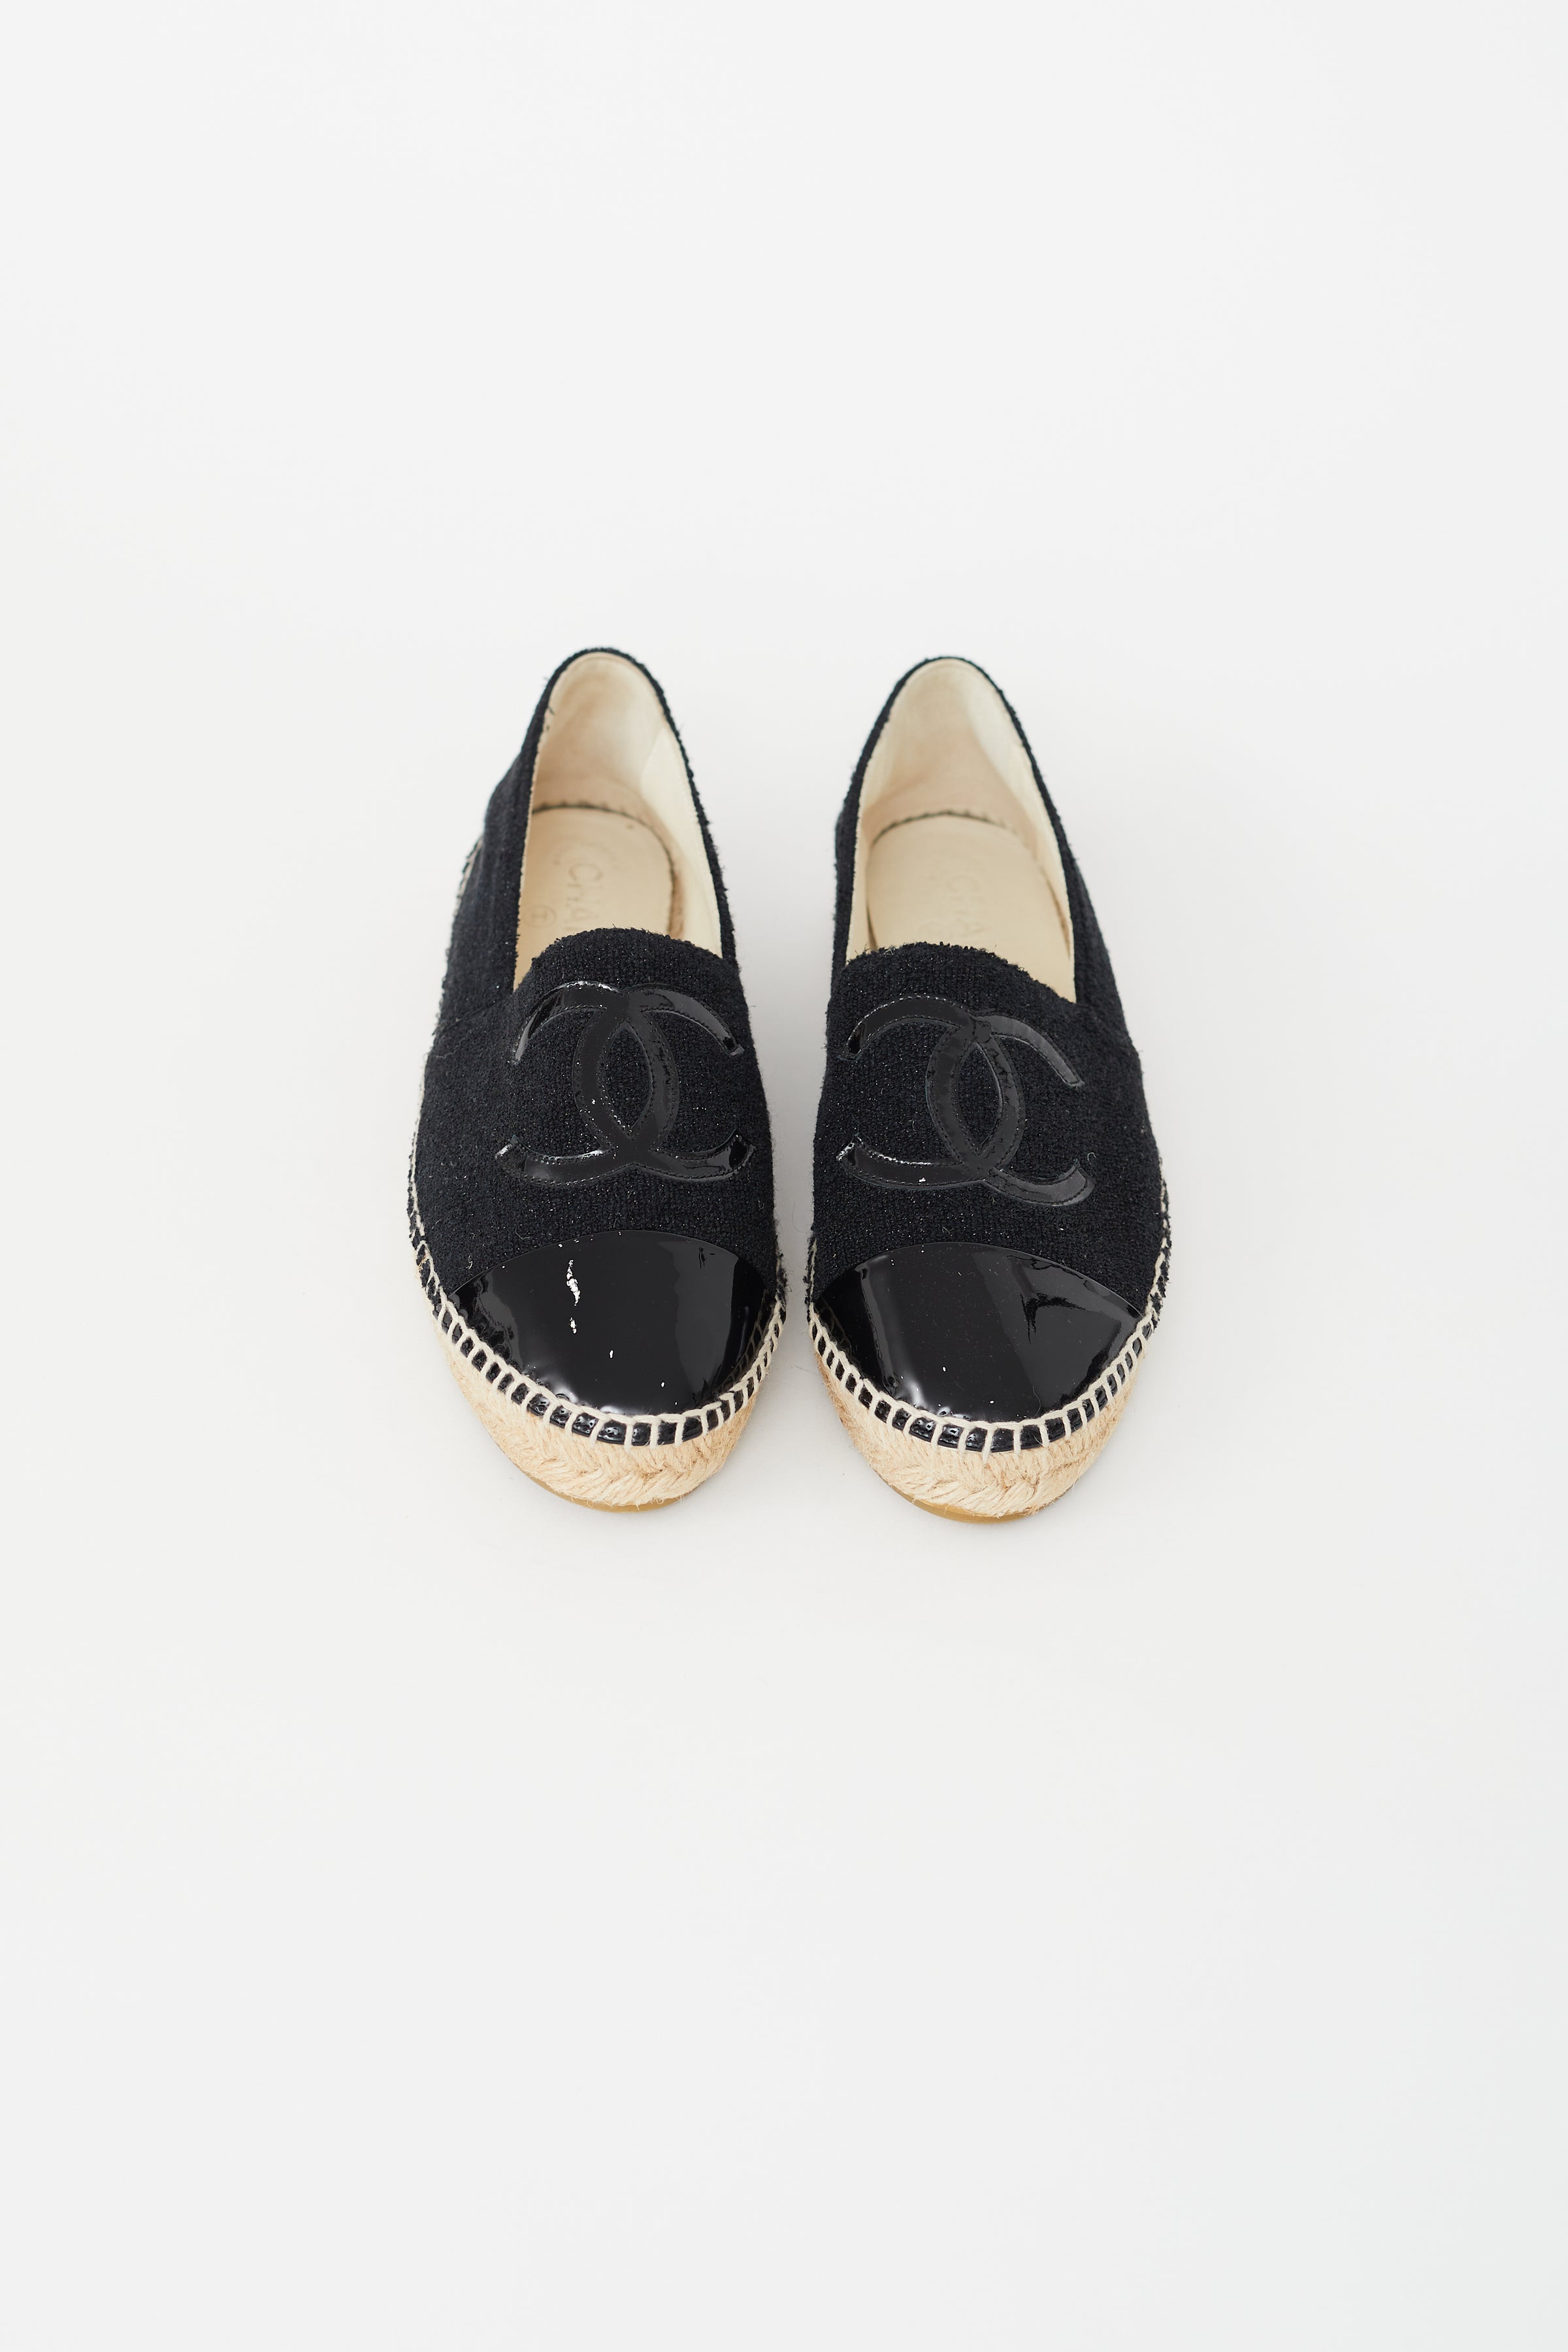 Chanel - Authenticated Espadrille - Leather Black Plain for Women, Never Worn